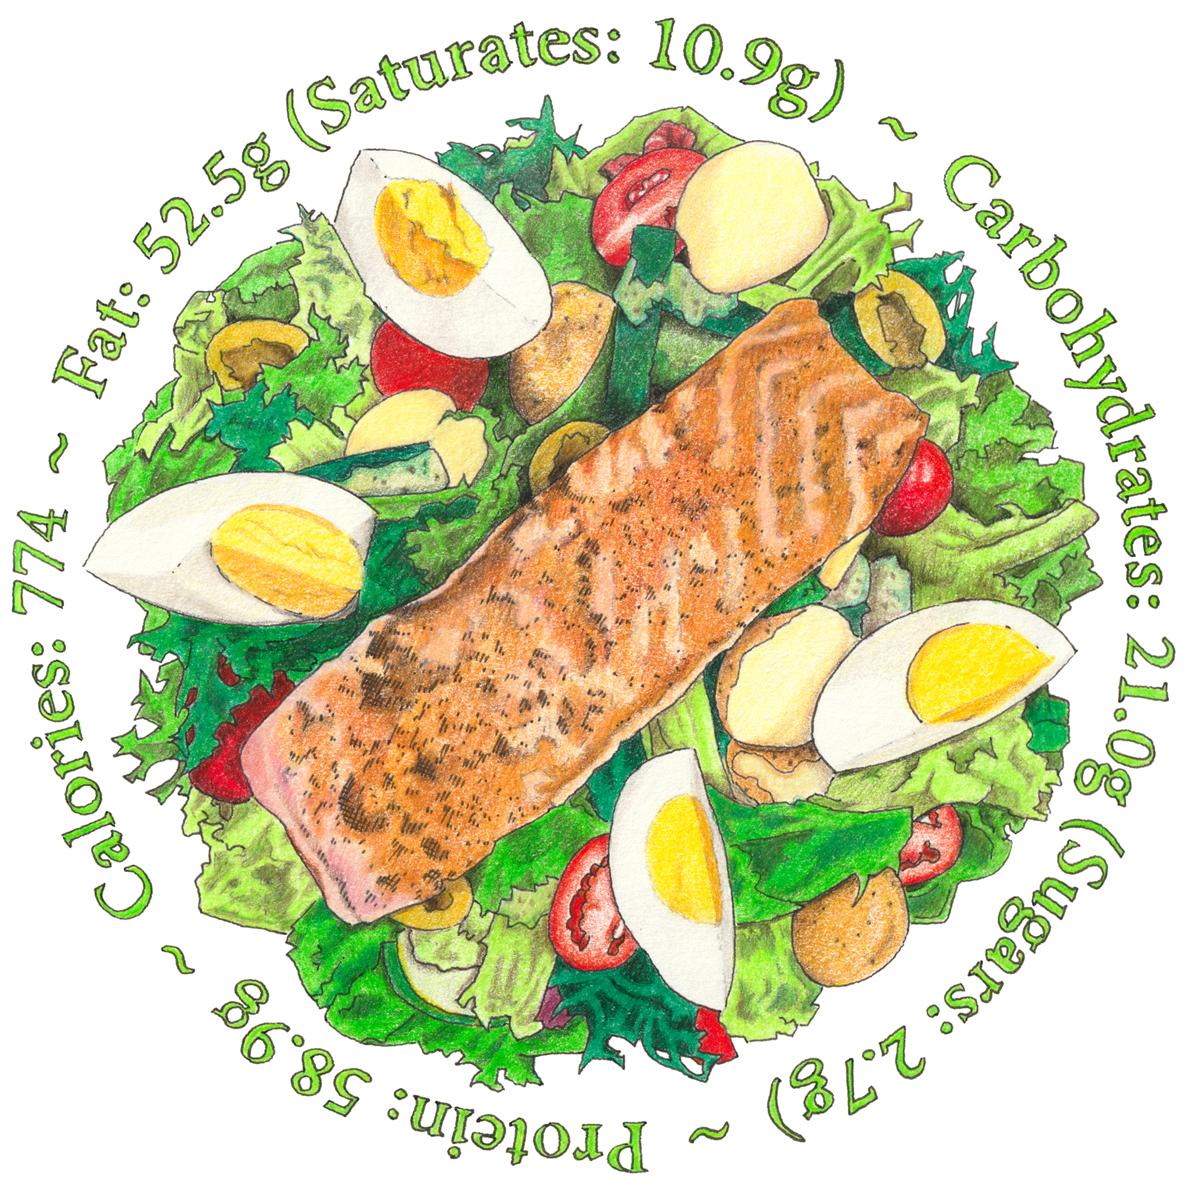 Limited edition print of coloured drawing of a plate of salmon salad.